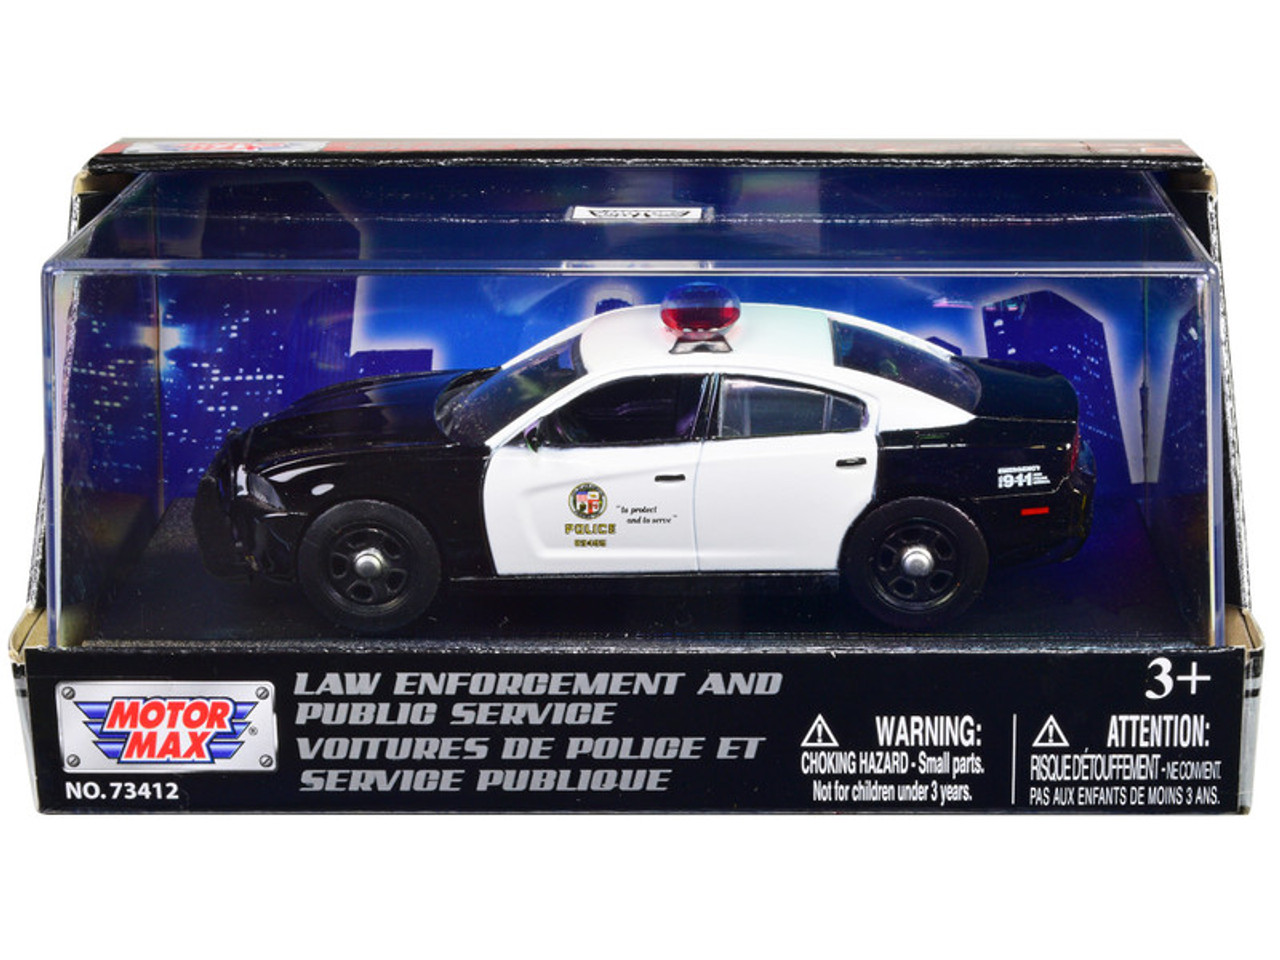 2011 Dodge Charger Pursuit Black and White "LAPD (Los Angeles Police Department)" 1/43 Diecast Model Car by Motormax